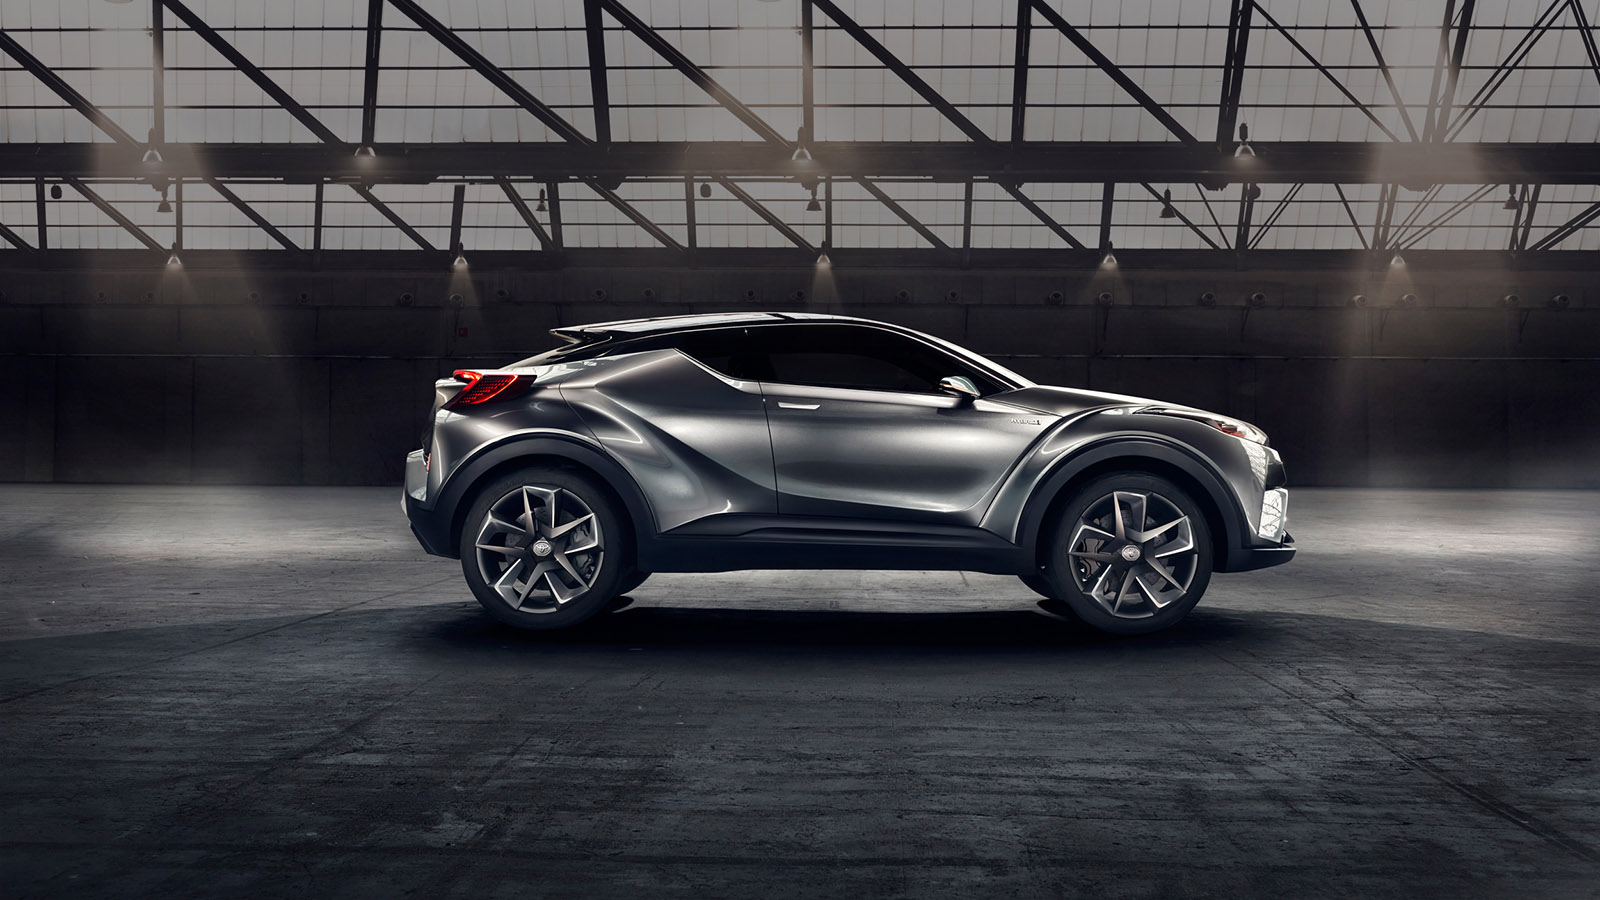 TOYOTA C-HR CONCEPT: A VISION OF THE FUTURE